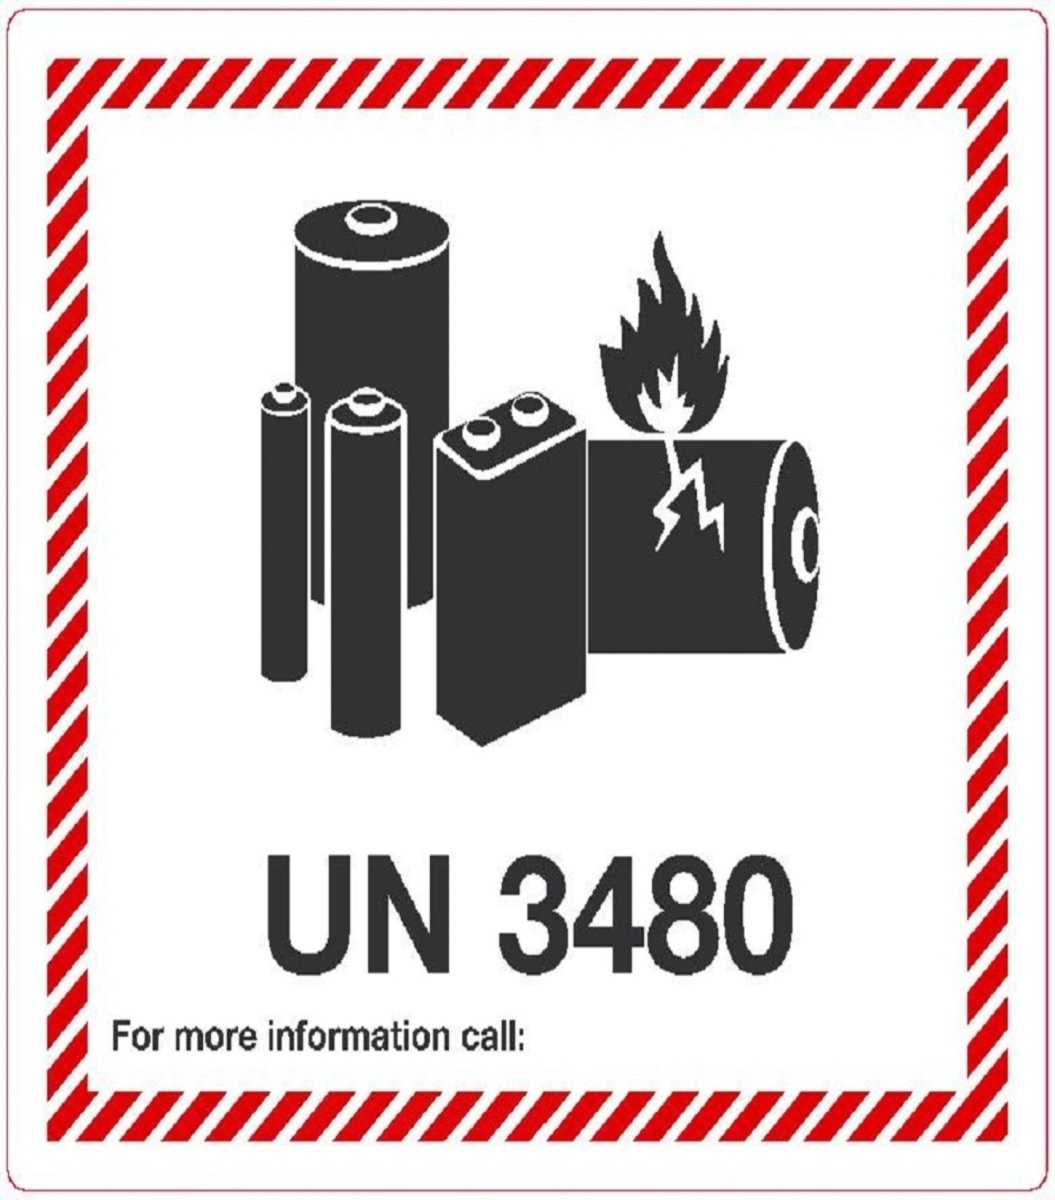 Lithium Battery marking UN 3480 Incl. Telephone number - SGS Netherlands